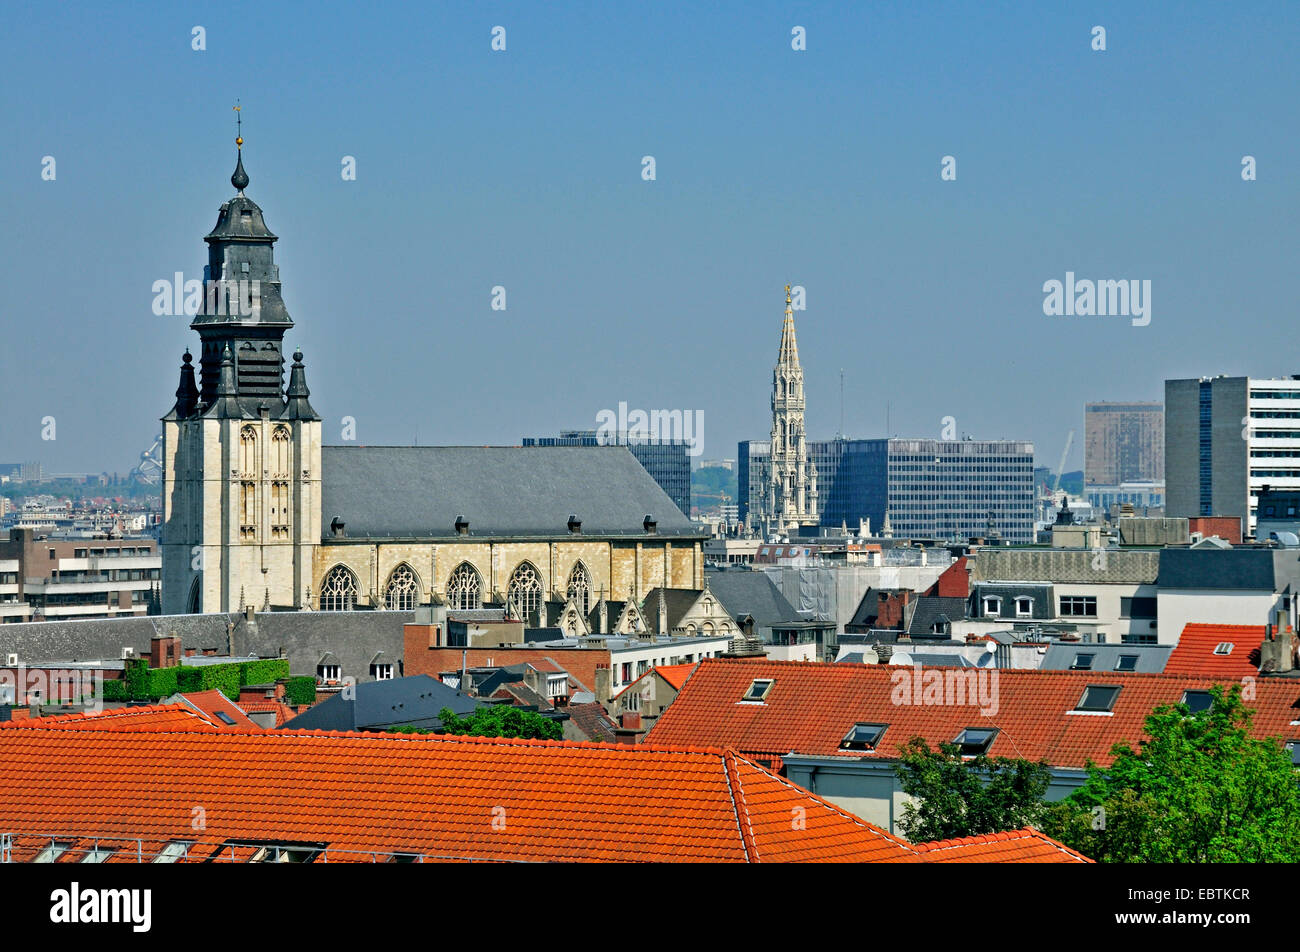 view from Poelaertplein to Notre Dame de la Chapel, Kapellekerk, gothic tower of the city hall in background, Belgium, Brussels Stock Photo